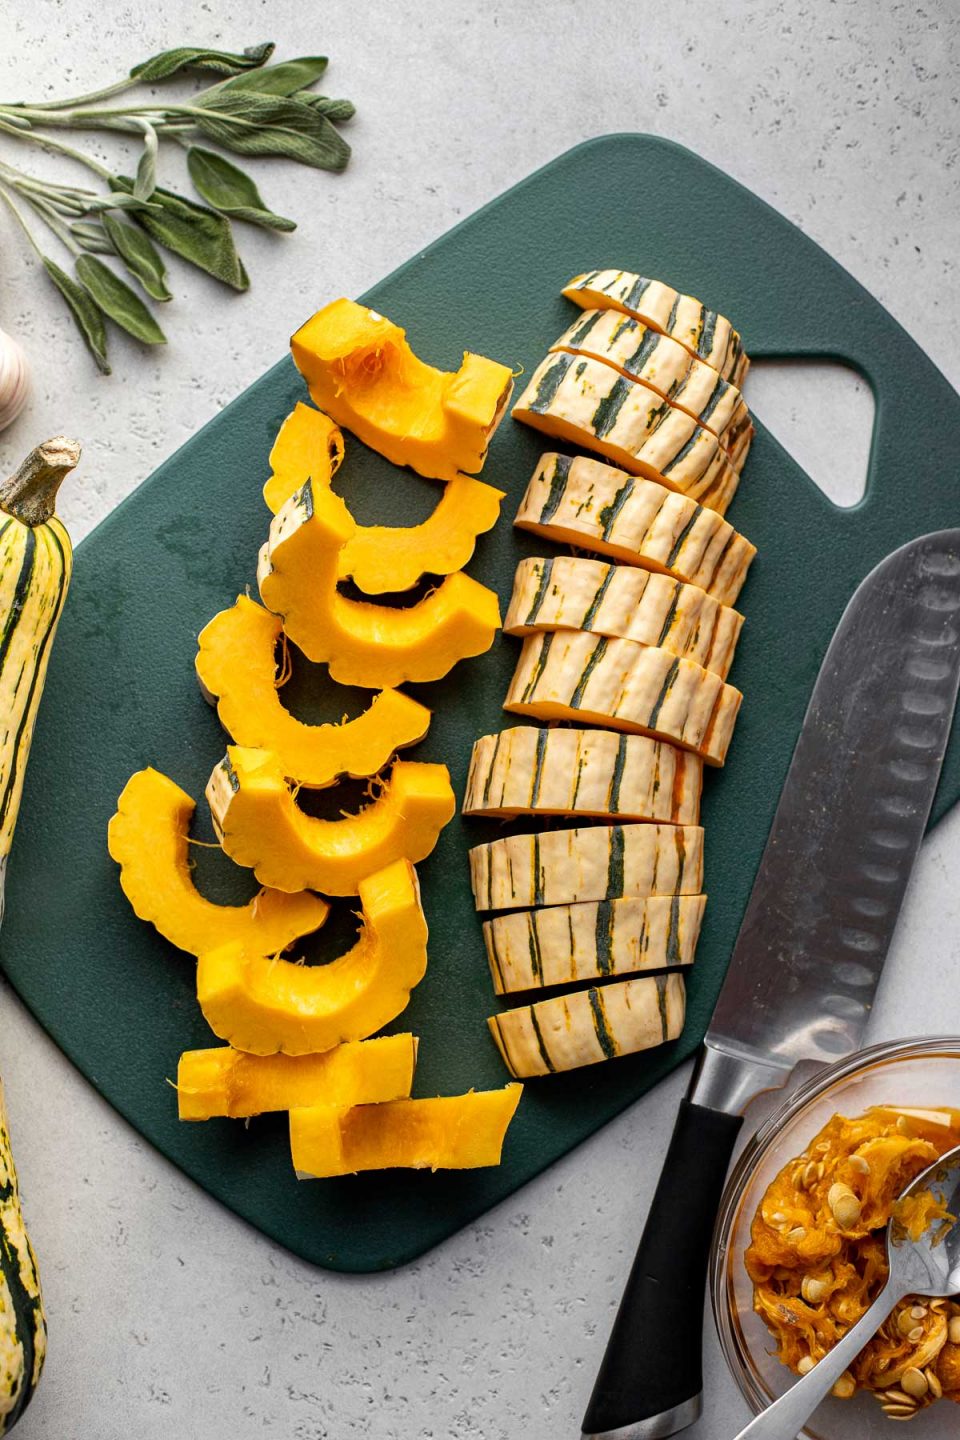 Cut slices of delicata squash arranged on a dark green plastic cutting board. A chef's knife rests on the cutting board. A small clear glass bowl filled with delicata seeds and a spoon, another whole delicata squash, and some loose fresh herbs surround the cutting board.